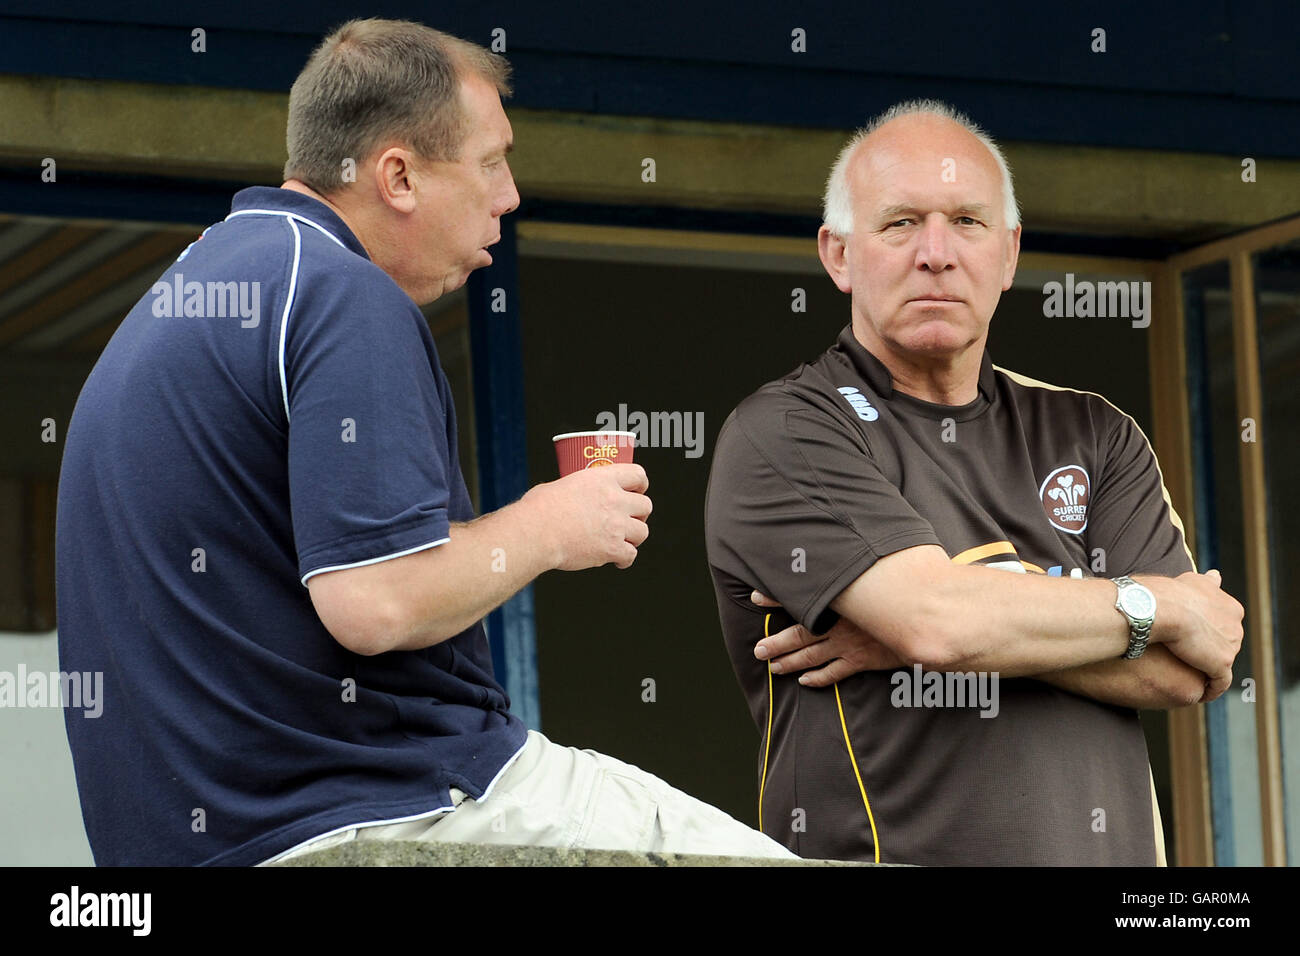 Surrey's coach Alan Butcher (r) chats with former Surrey player and now teacher at Whitgift School David Ward on the balcony of the pavilion at the Whitgift School Stock Photo